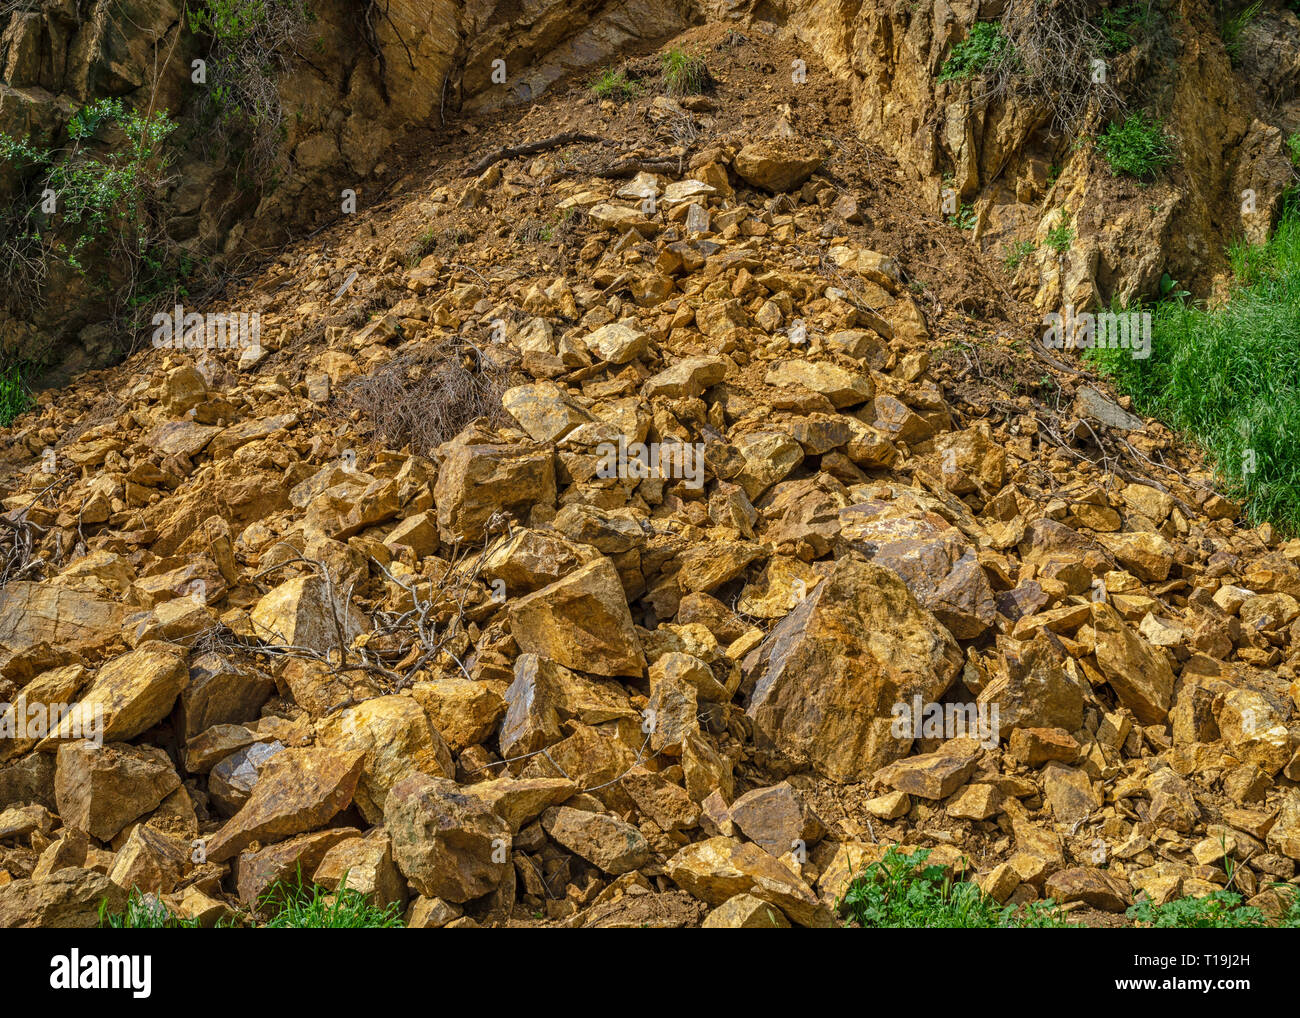 Landslide along fire road in Runyon Canyon due to heavy rains, Los Angeles, CA. Stock Photo